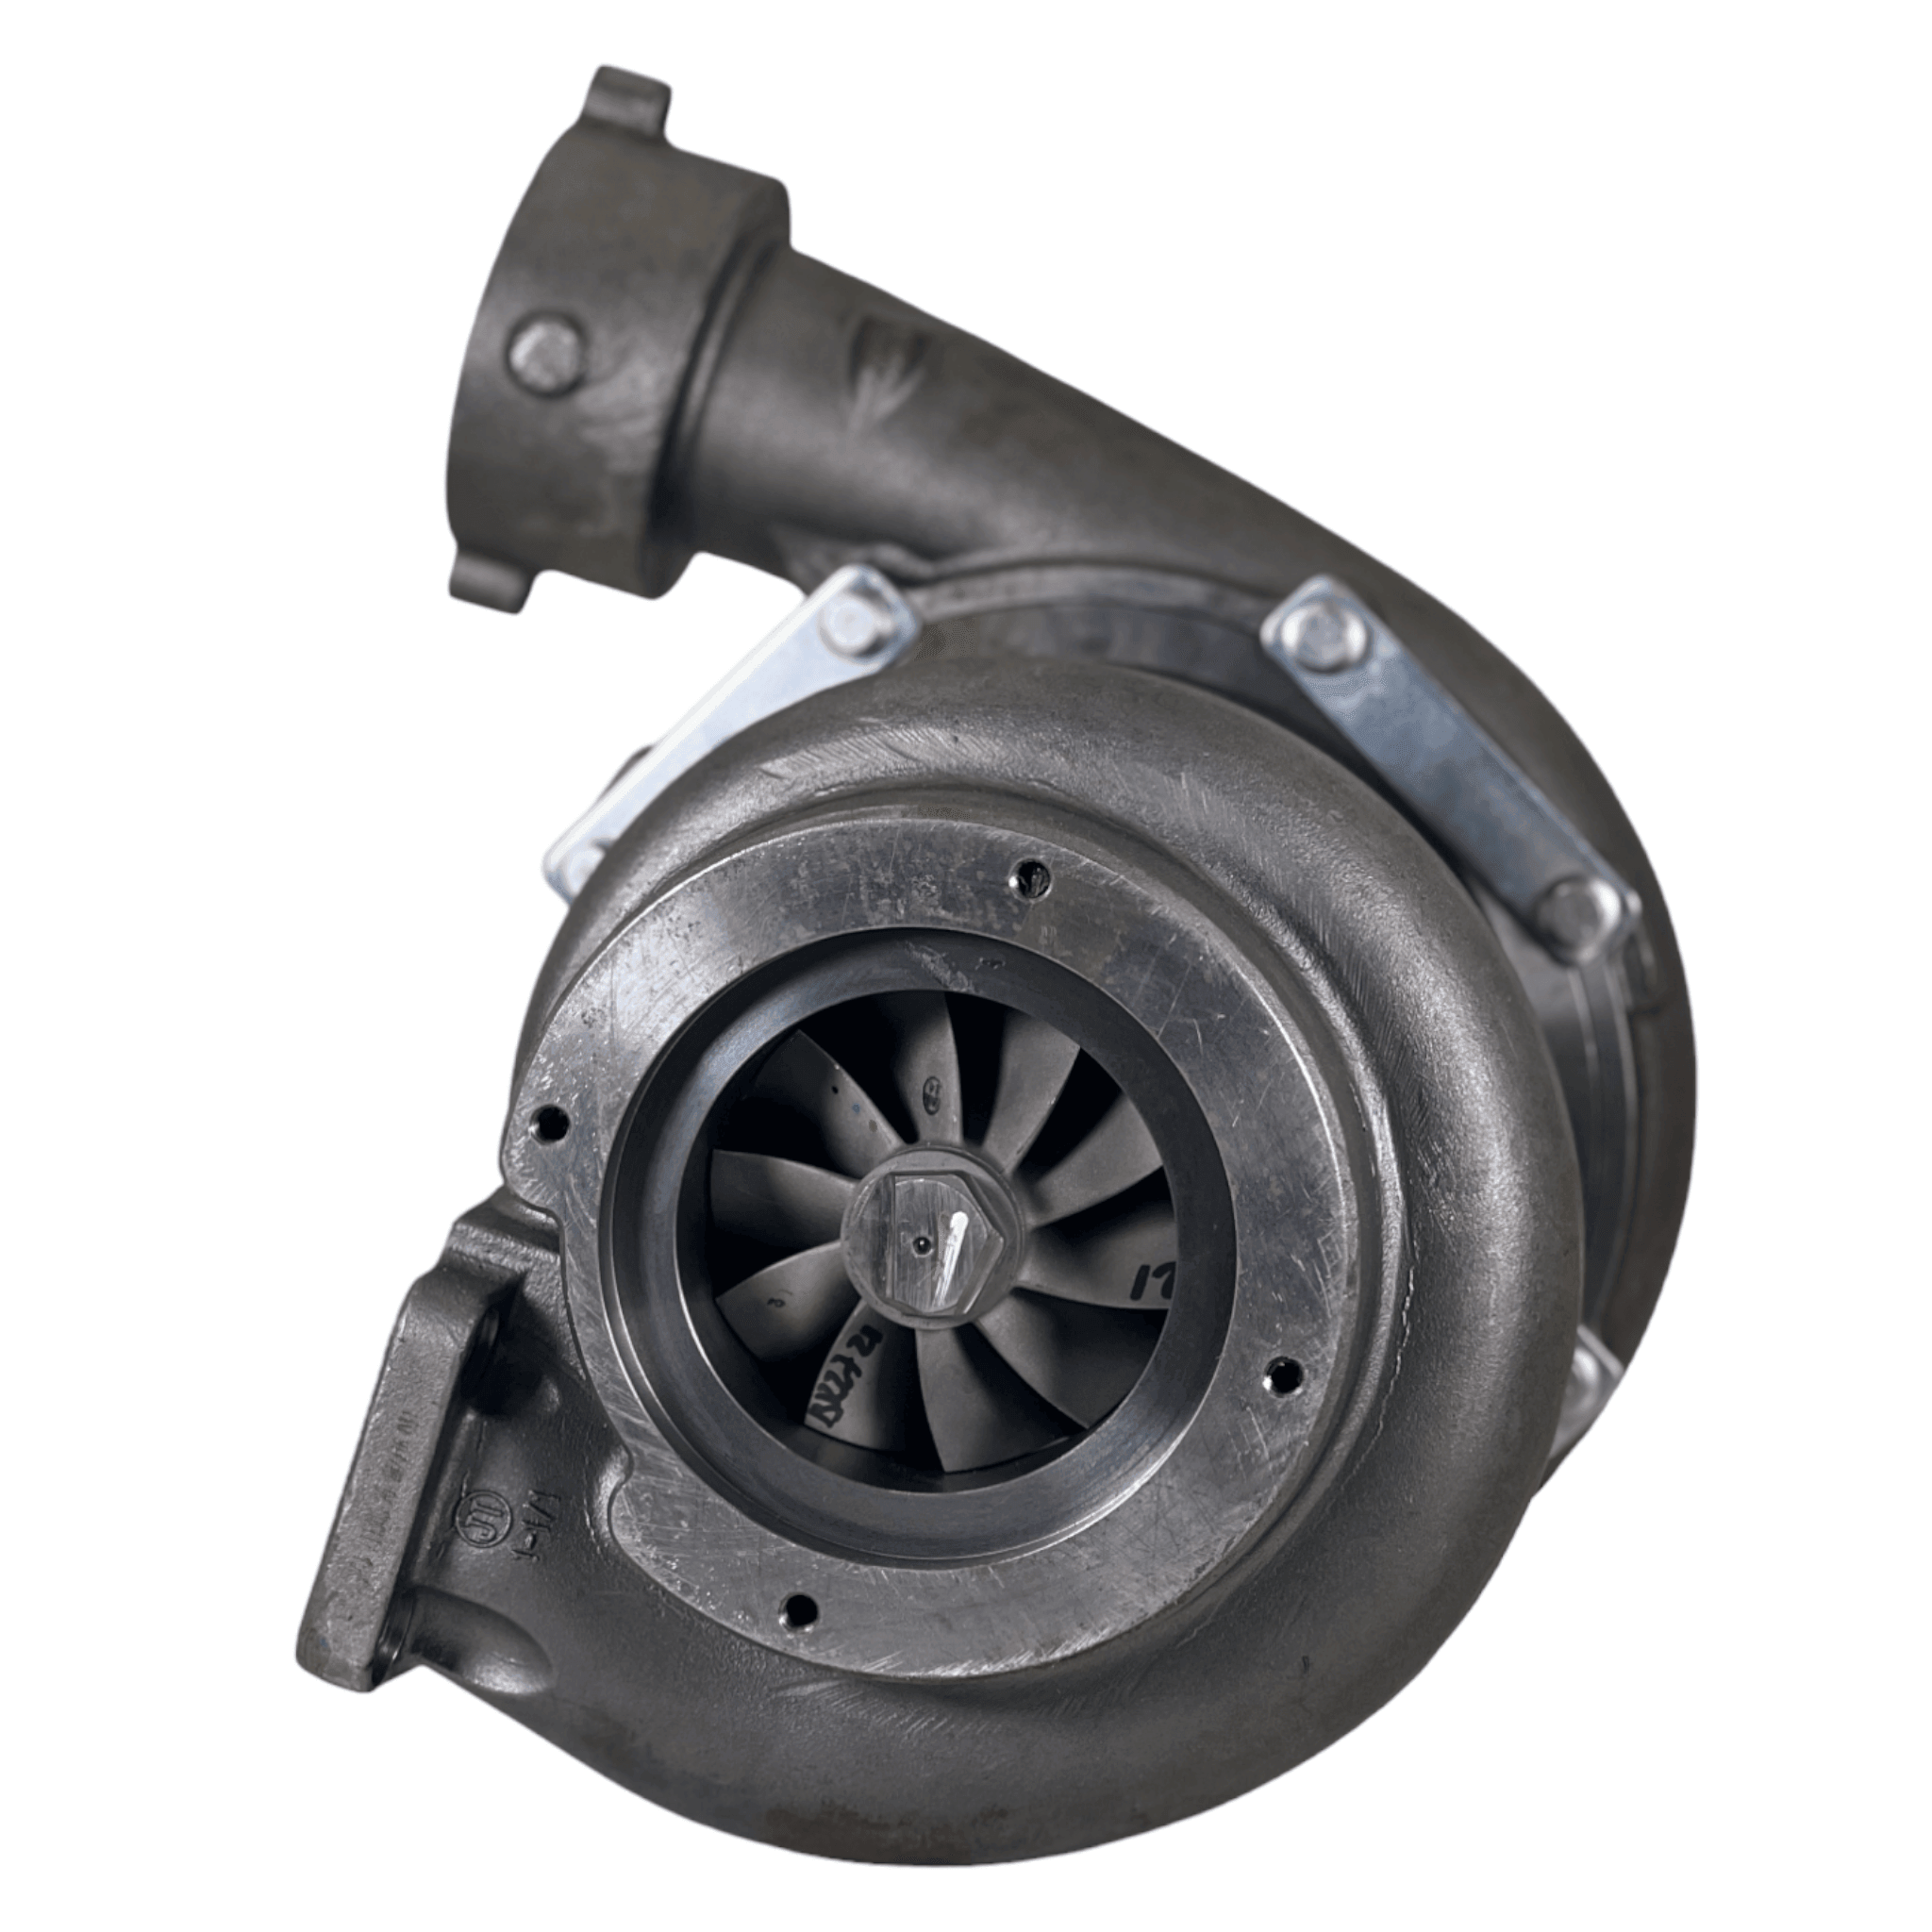 20R-3987 Genuine Cat Turbocharger For Caterpillar G3508/ G3516 Engines - ADVANCED TRUCK PARTS